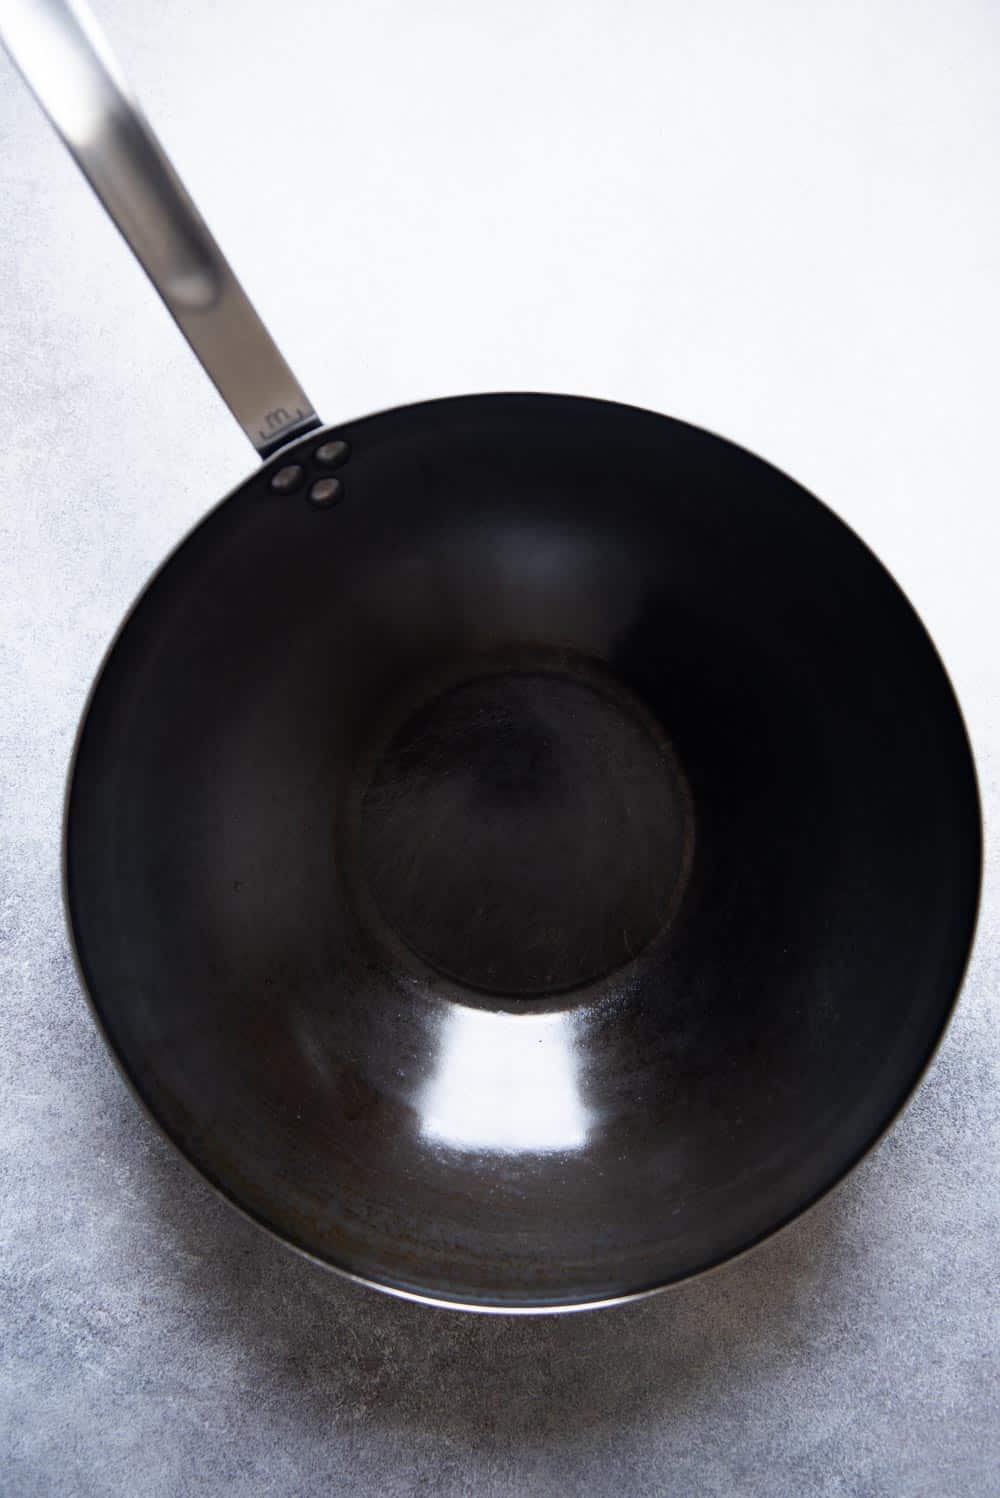 How to Season a Wok - step by step guide